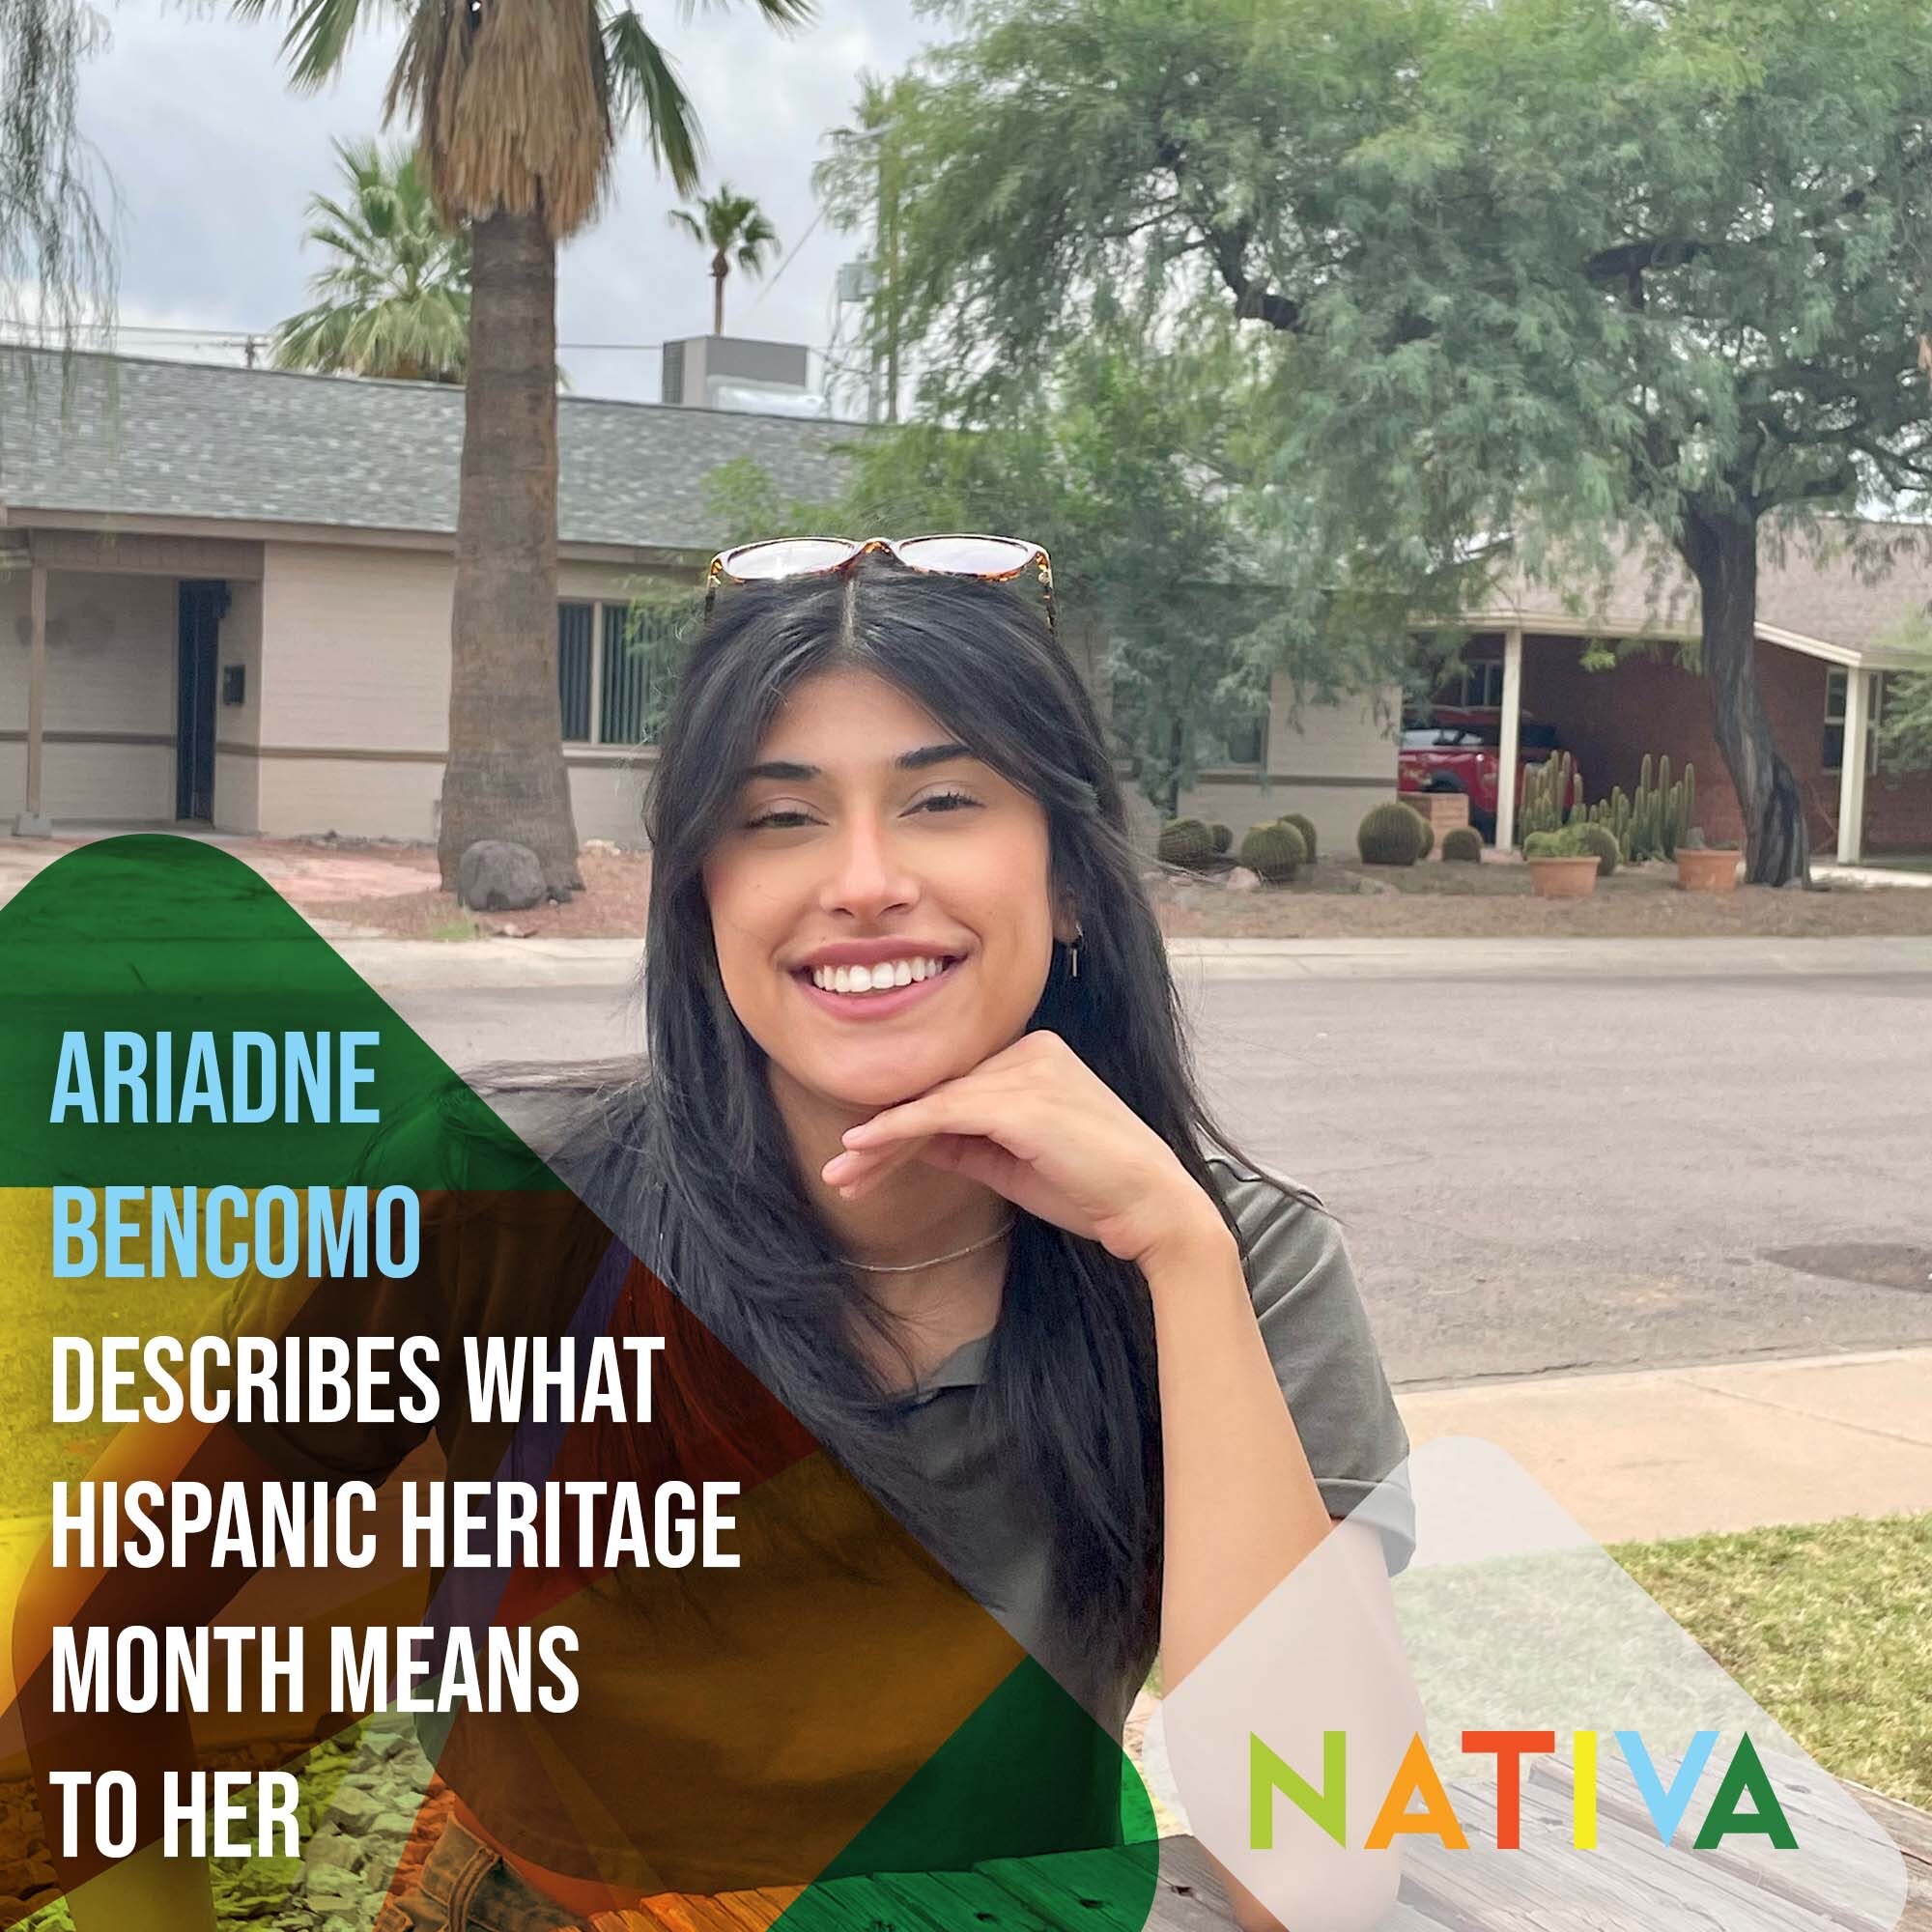 Nativa Employees Share their Hispanic Heritage Month Personal Stories